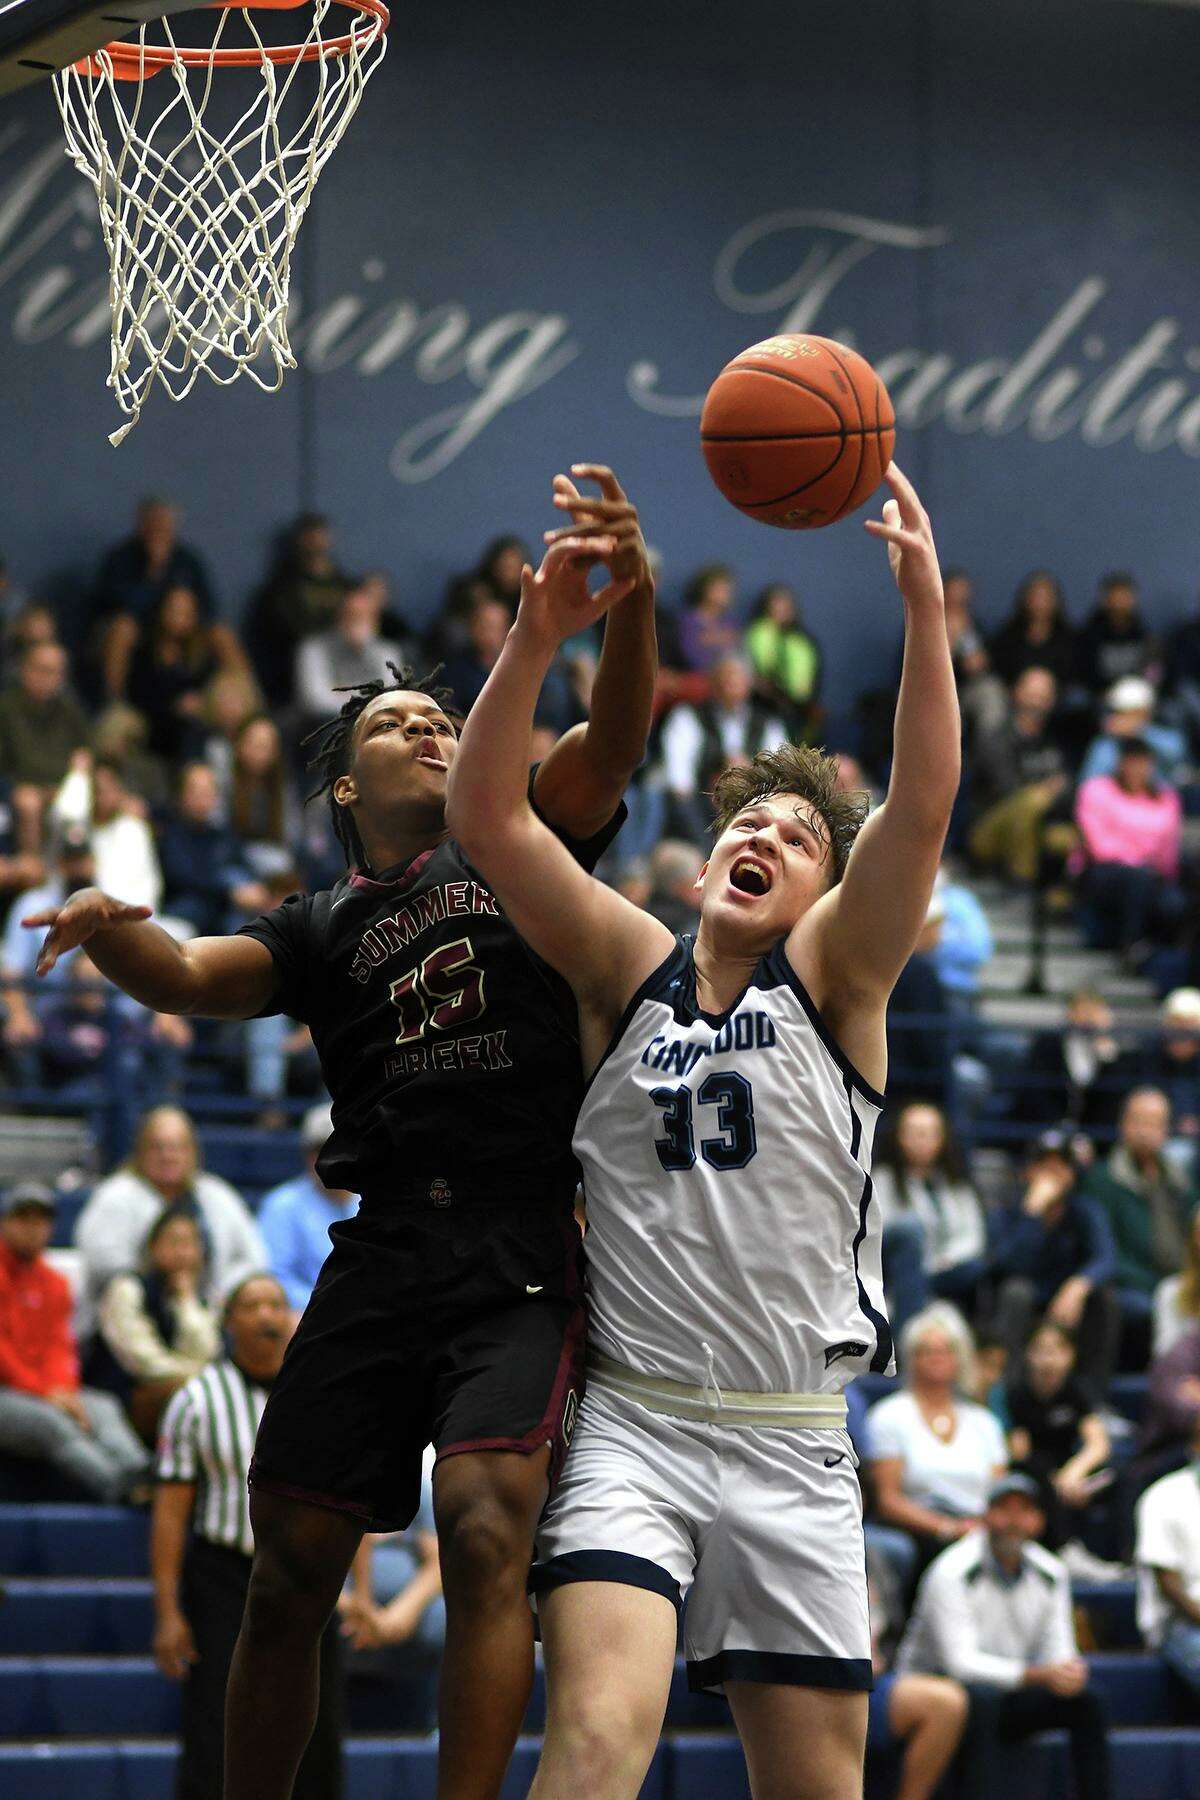 Kingwood senior Mason Carlos (33) gets his shot blocked by Summer Creek junior Cory Nichols (15) during the first quarter of their District 21-6A matchup at Kingwood High School on Friday, Jan. 14, 2022.